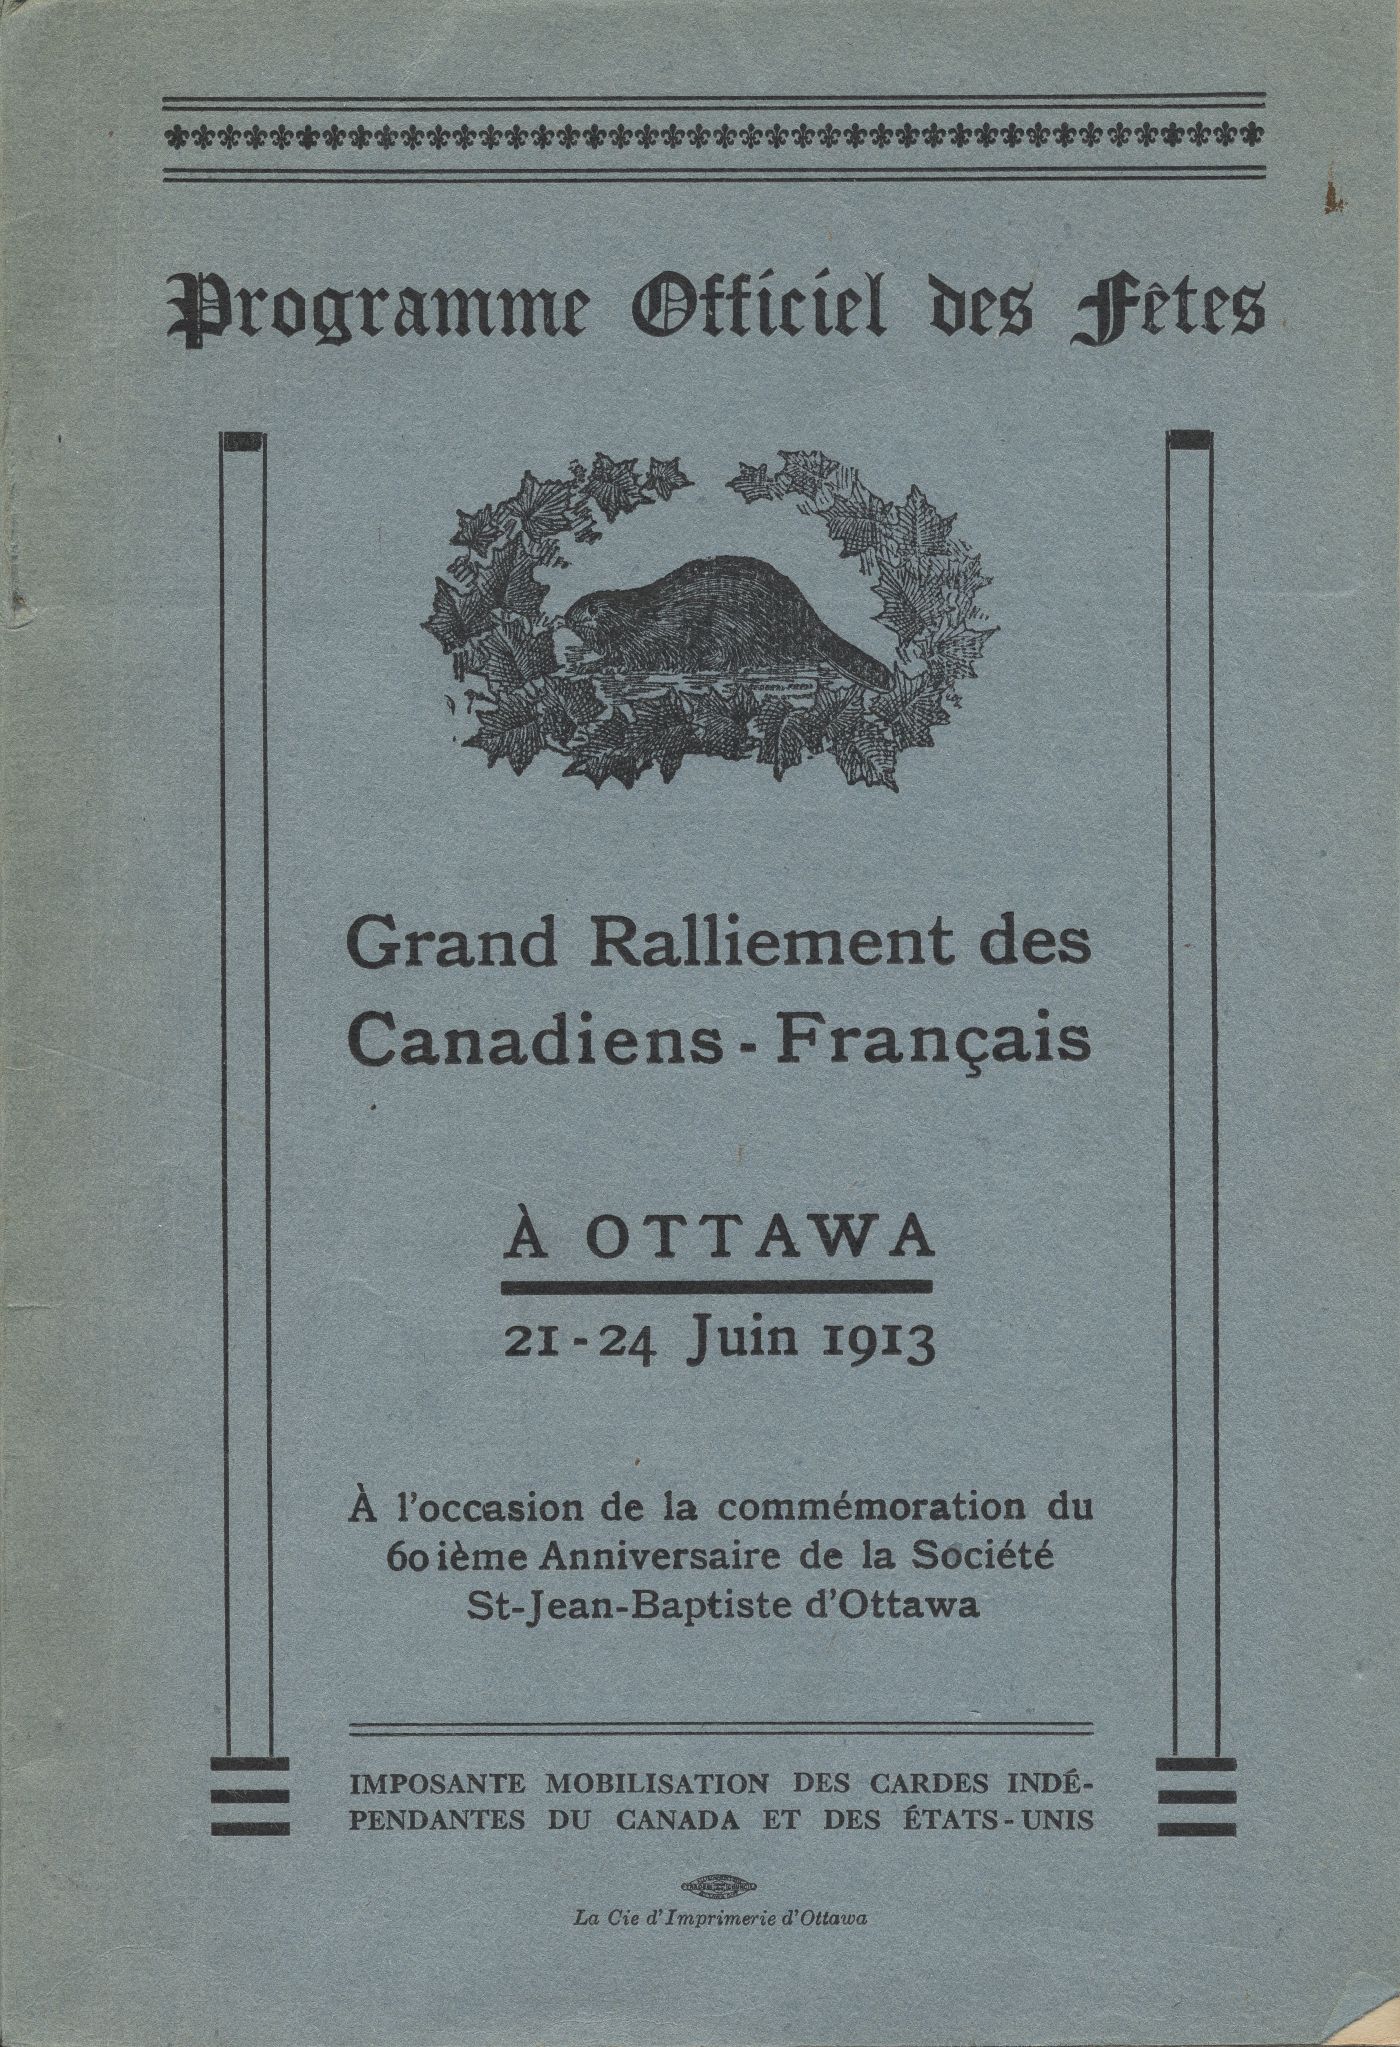 Text printed in French. The title page, printed on blue card stock, includes the name, location and rationale of the rally in large print. A beaver, symbol of the Société Saint-Jean-Baptiste, takes up the first third of the page. The inside of the program contains a few pages detailing events, with information organized according to the date, time and content of the activities.